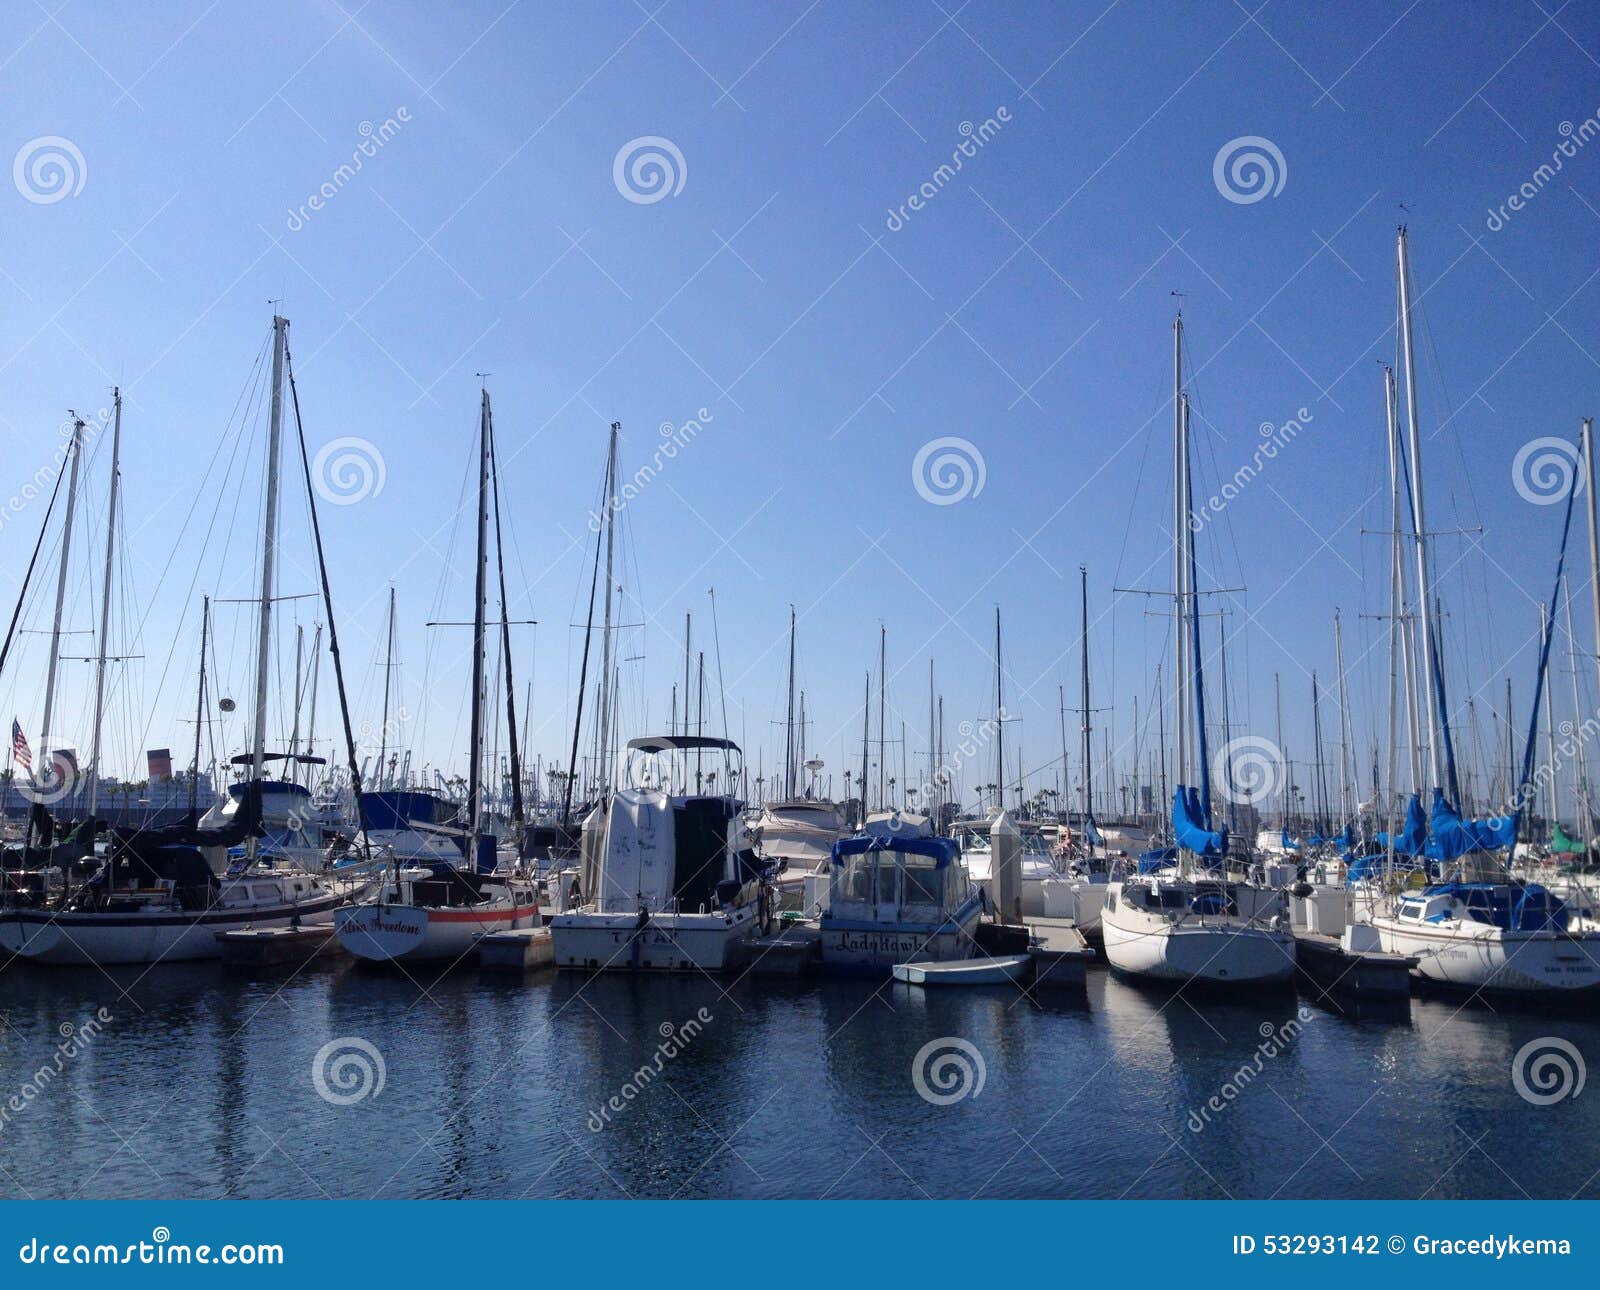 Landscape of Long Beach Marina Editorial Photography - Image of dock ...